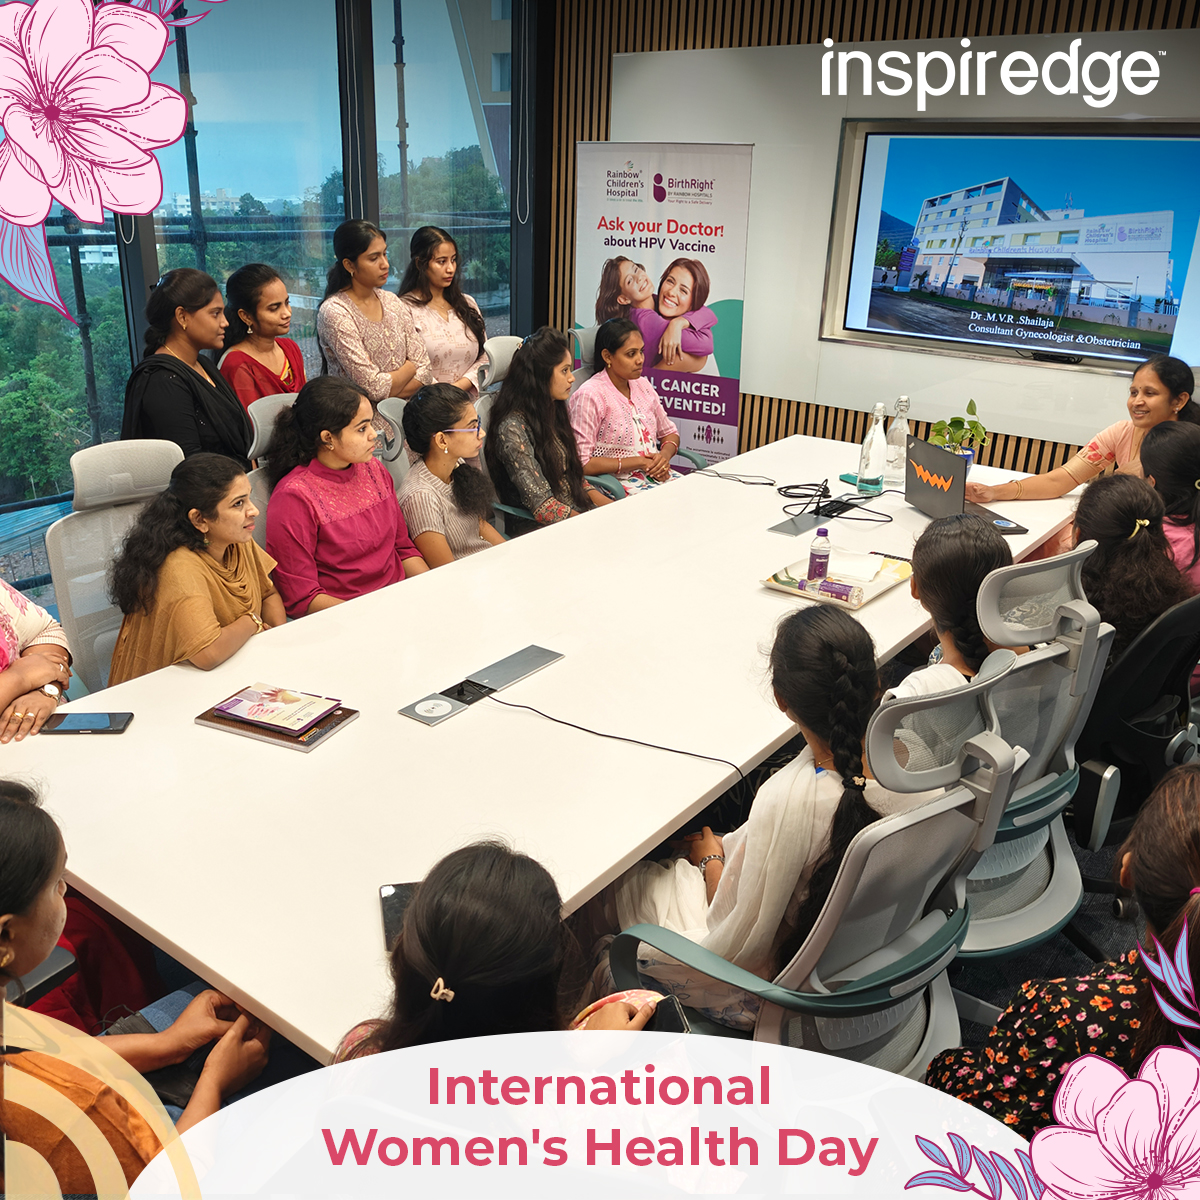 On International Women's Health Day, we hosted a gynec talk with Dr. MVR Shailaja, MS, covering key topics like gynecological issues, menstrual health, and cervical cancer. Thank you all participants! Let's keep prioritizing women's health every day!
#WomensHealth #Inspiredge